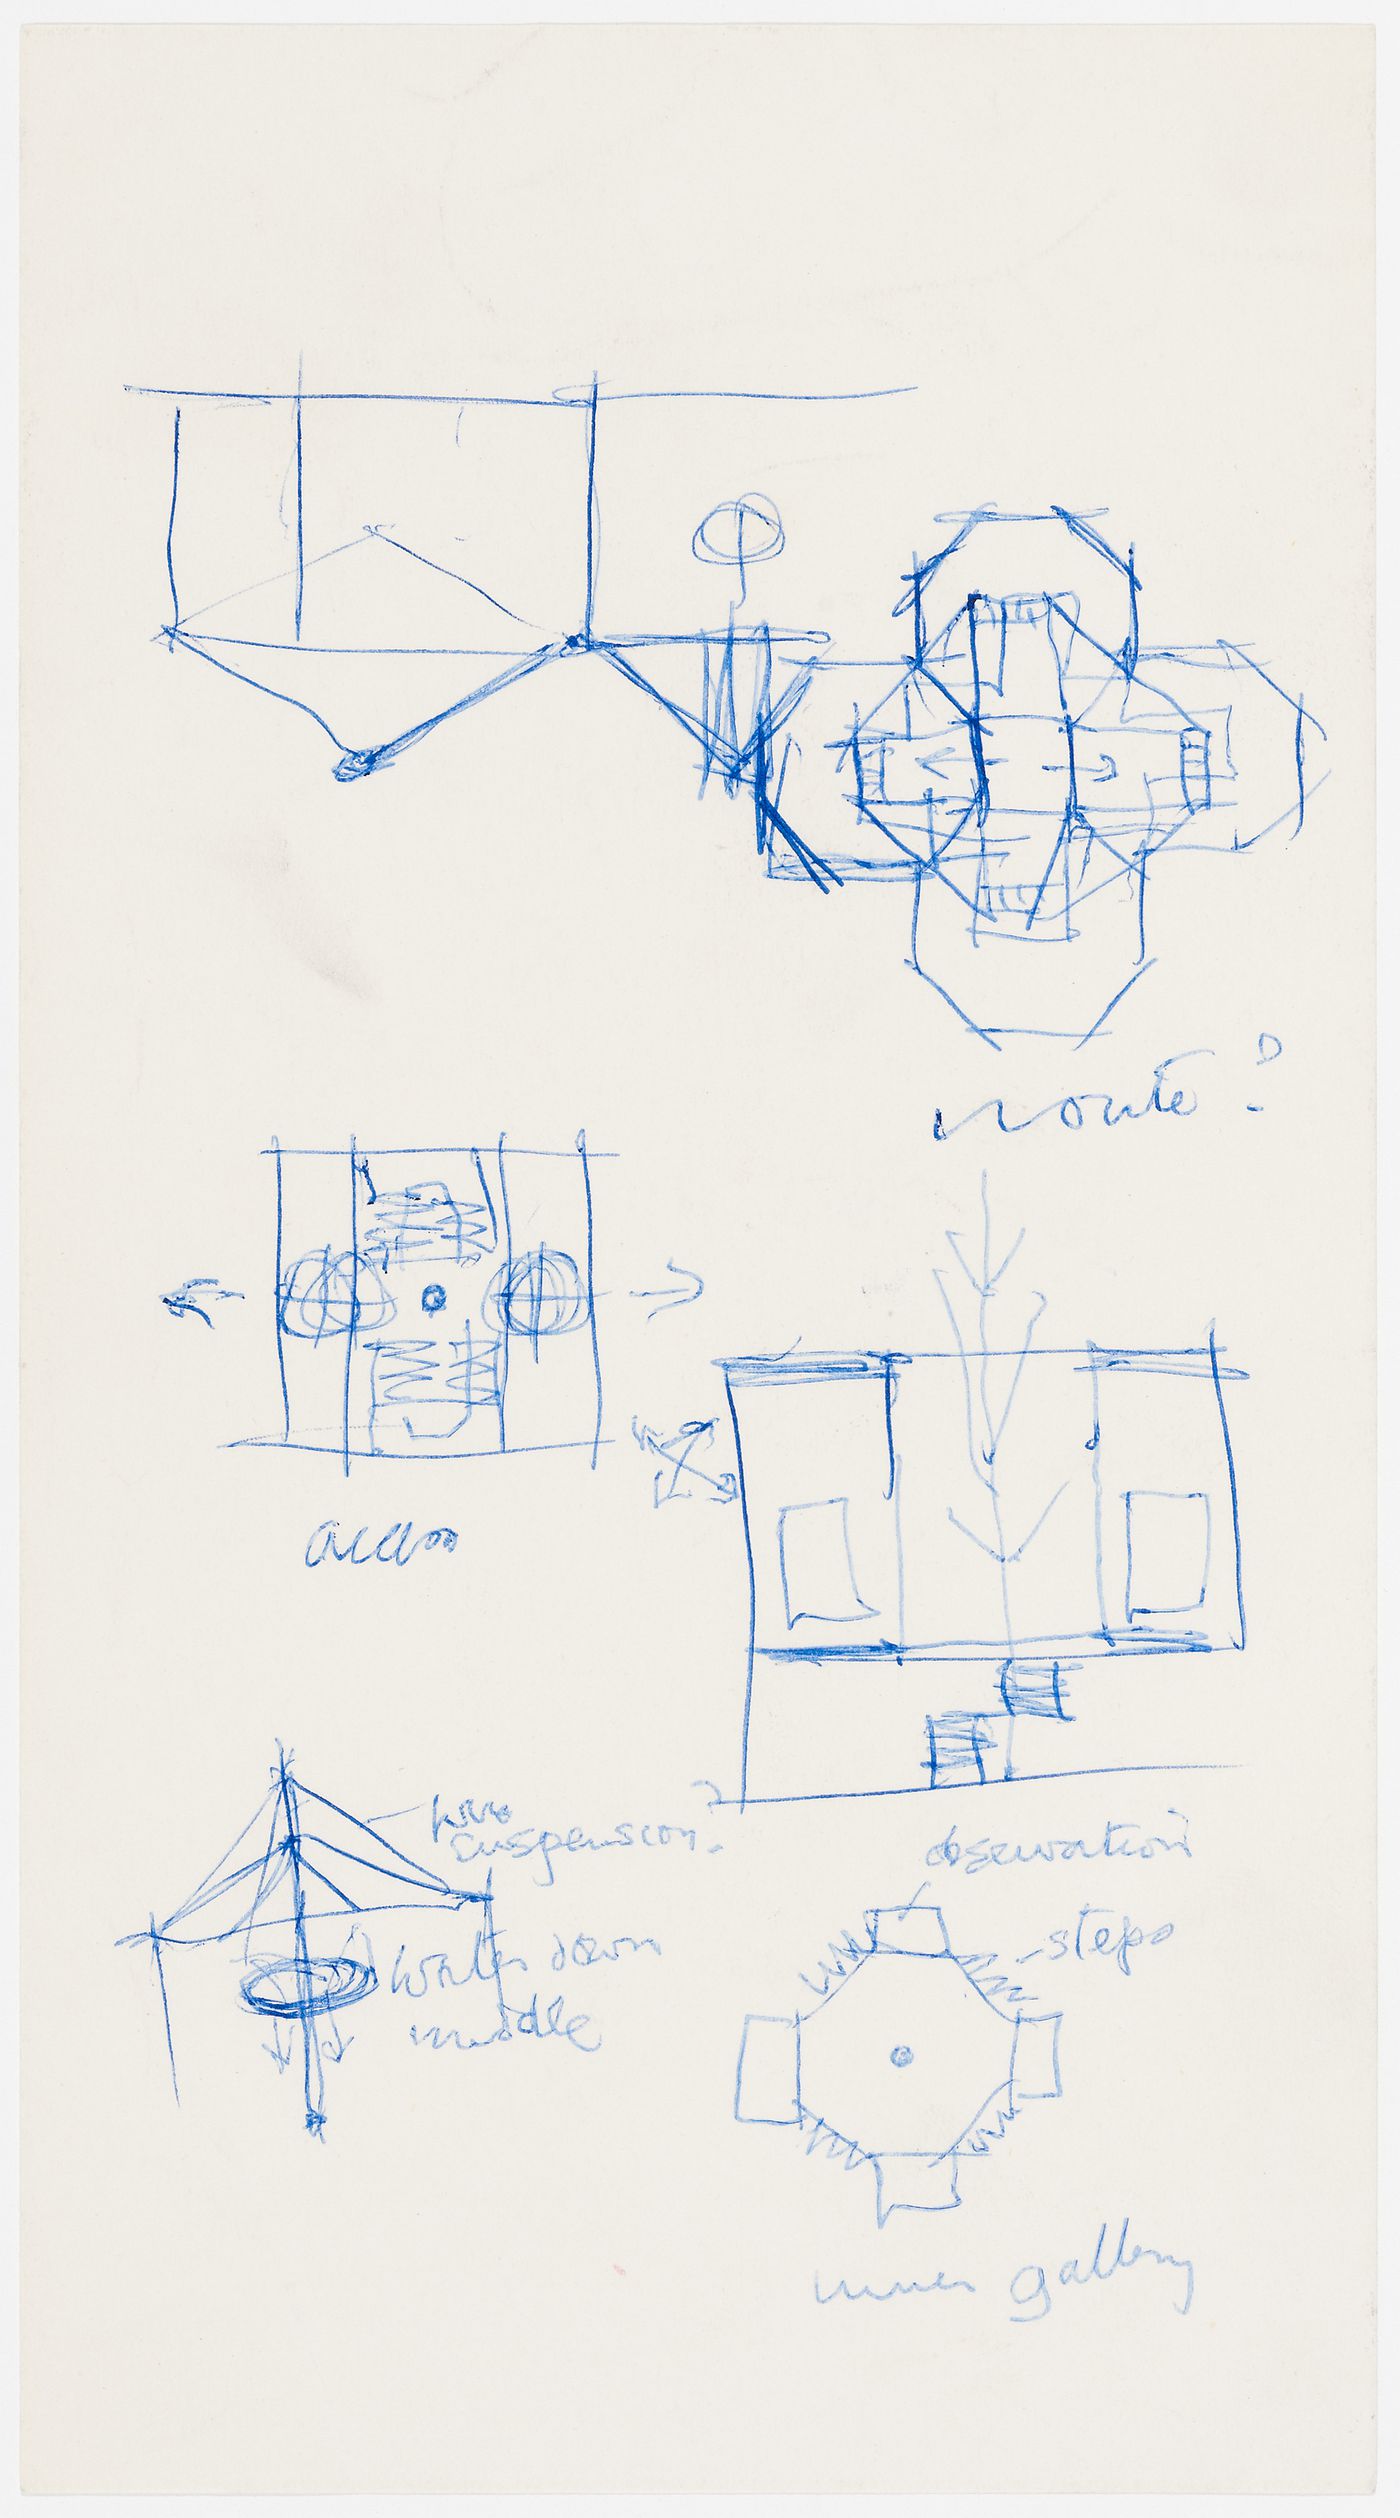 Conceptual sketches, including plan of inner gallery, for the Aviary at the London Zoo, London, England